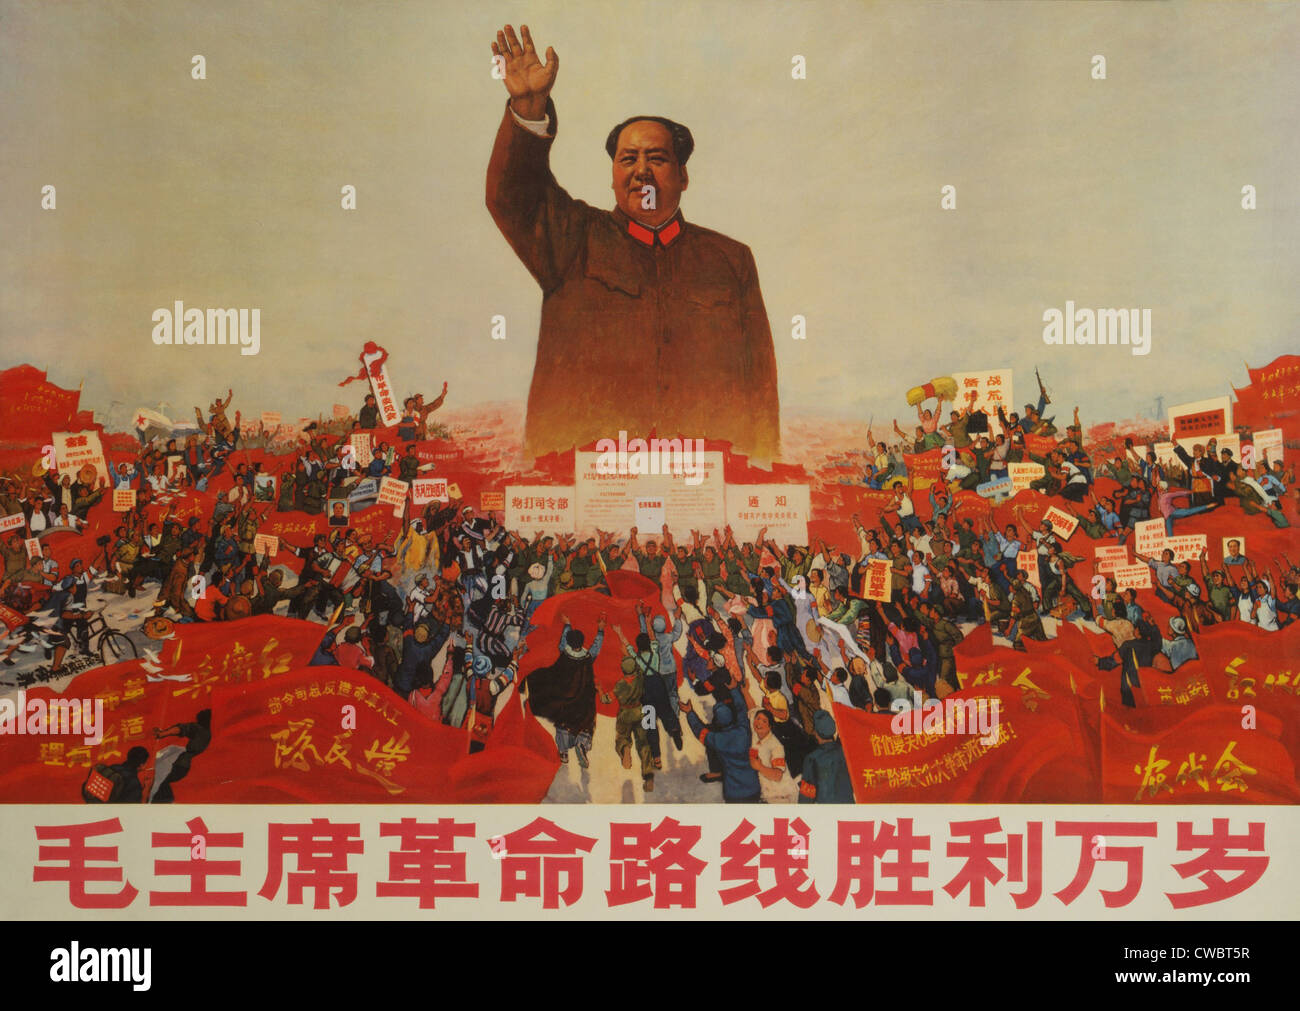 Long live the victory of Chairman Mao's revolutionary line. Poster shows Mao Zedong greeting mass rally of people holding signs Stock Photo